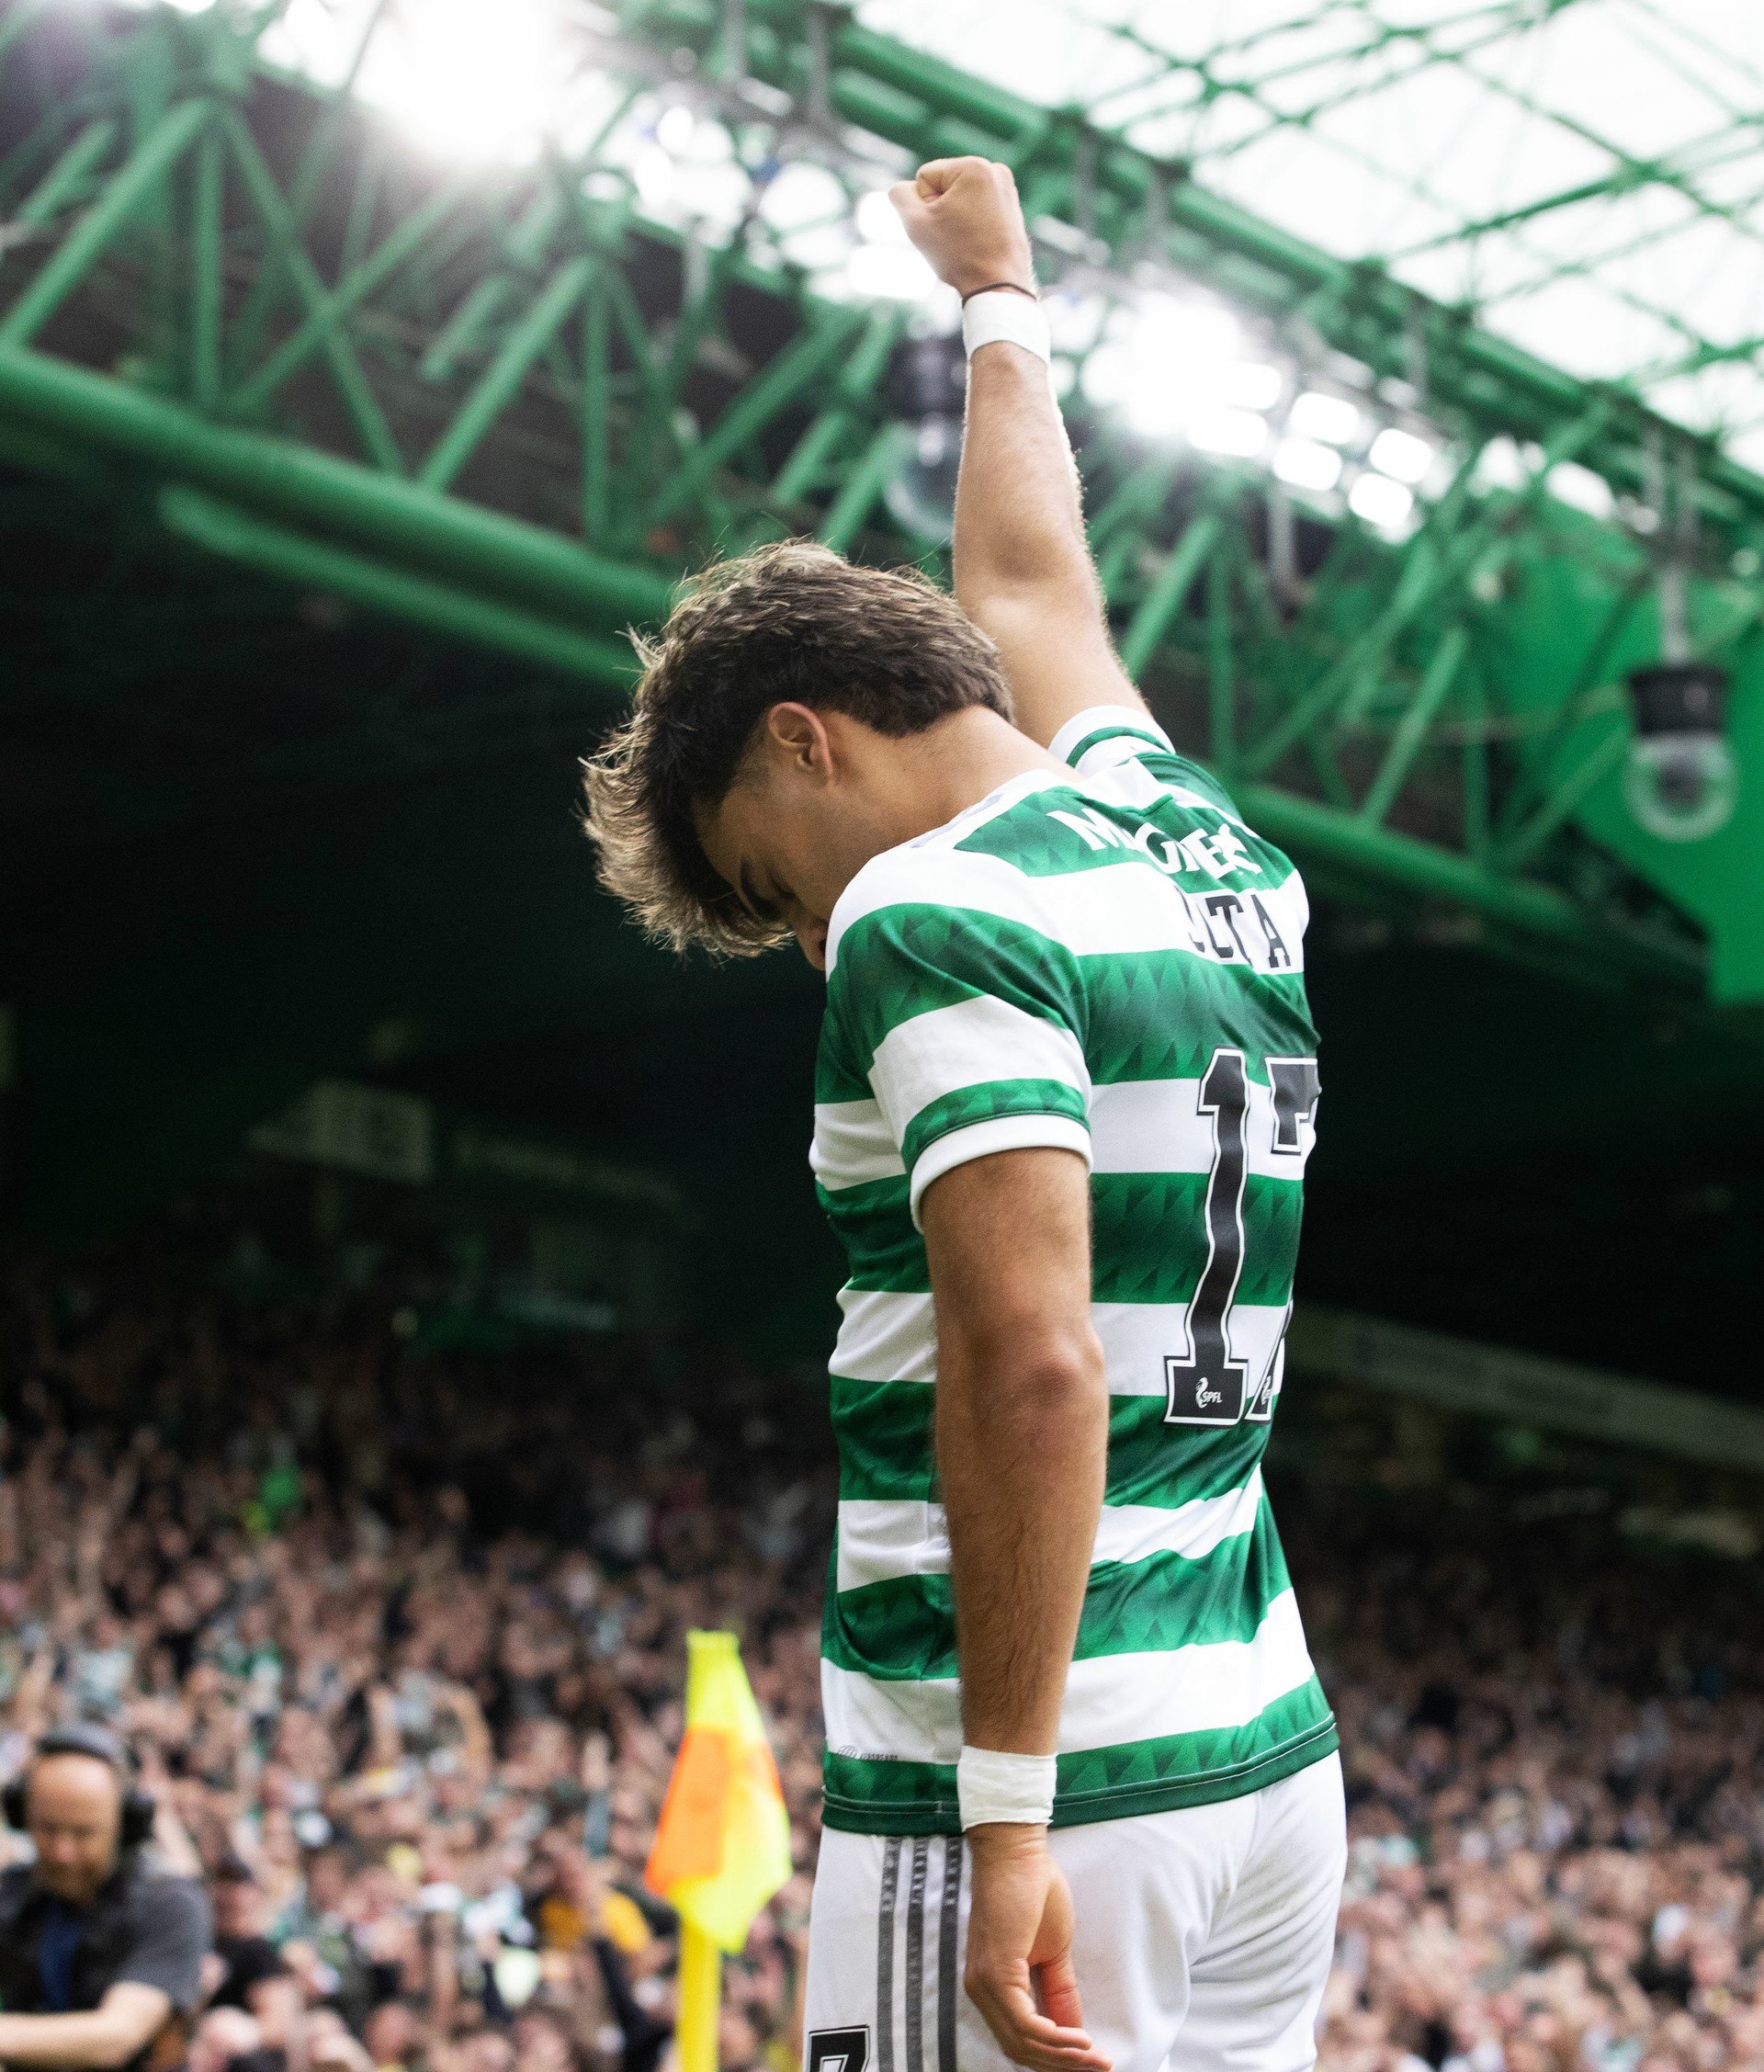 Jota celebrates after scoring to make it 2-0 in the first Old Firm of the season.